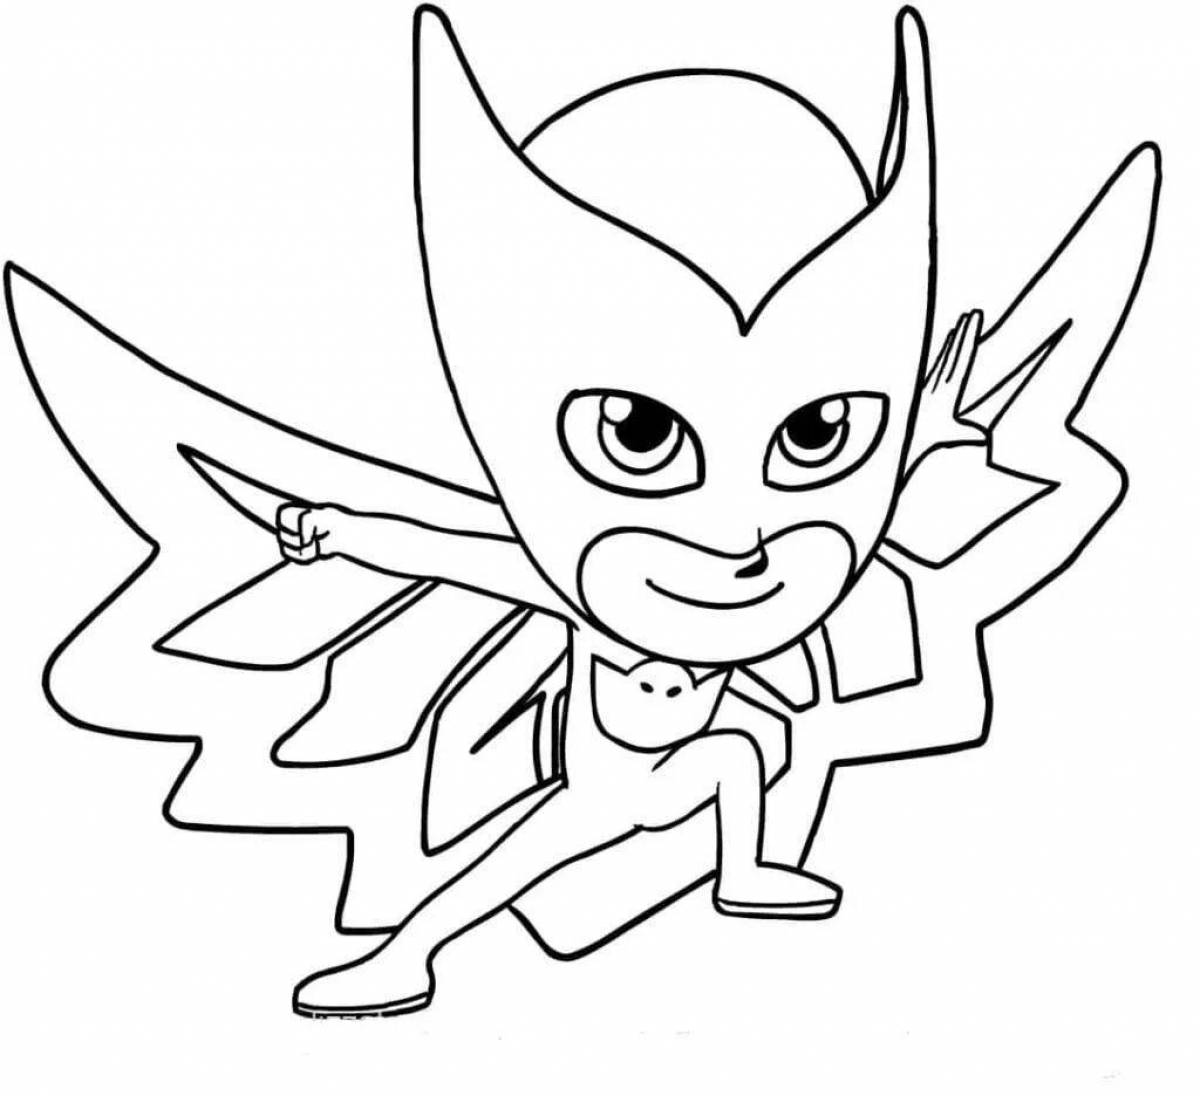 Coloring book perfect masked heroes